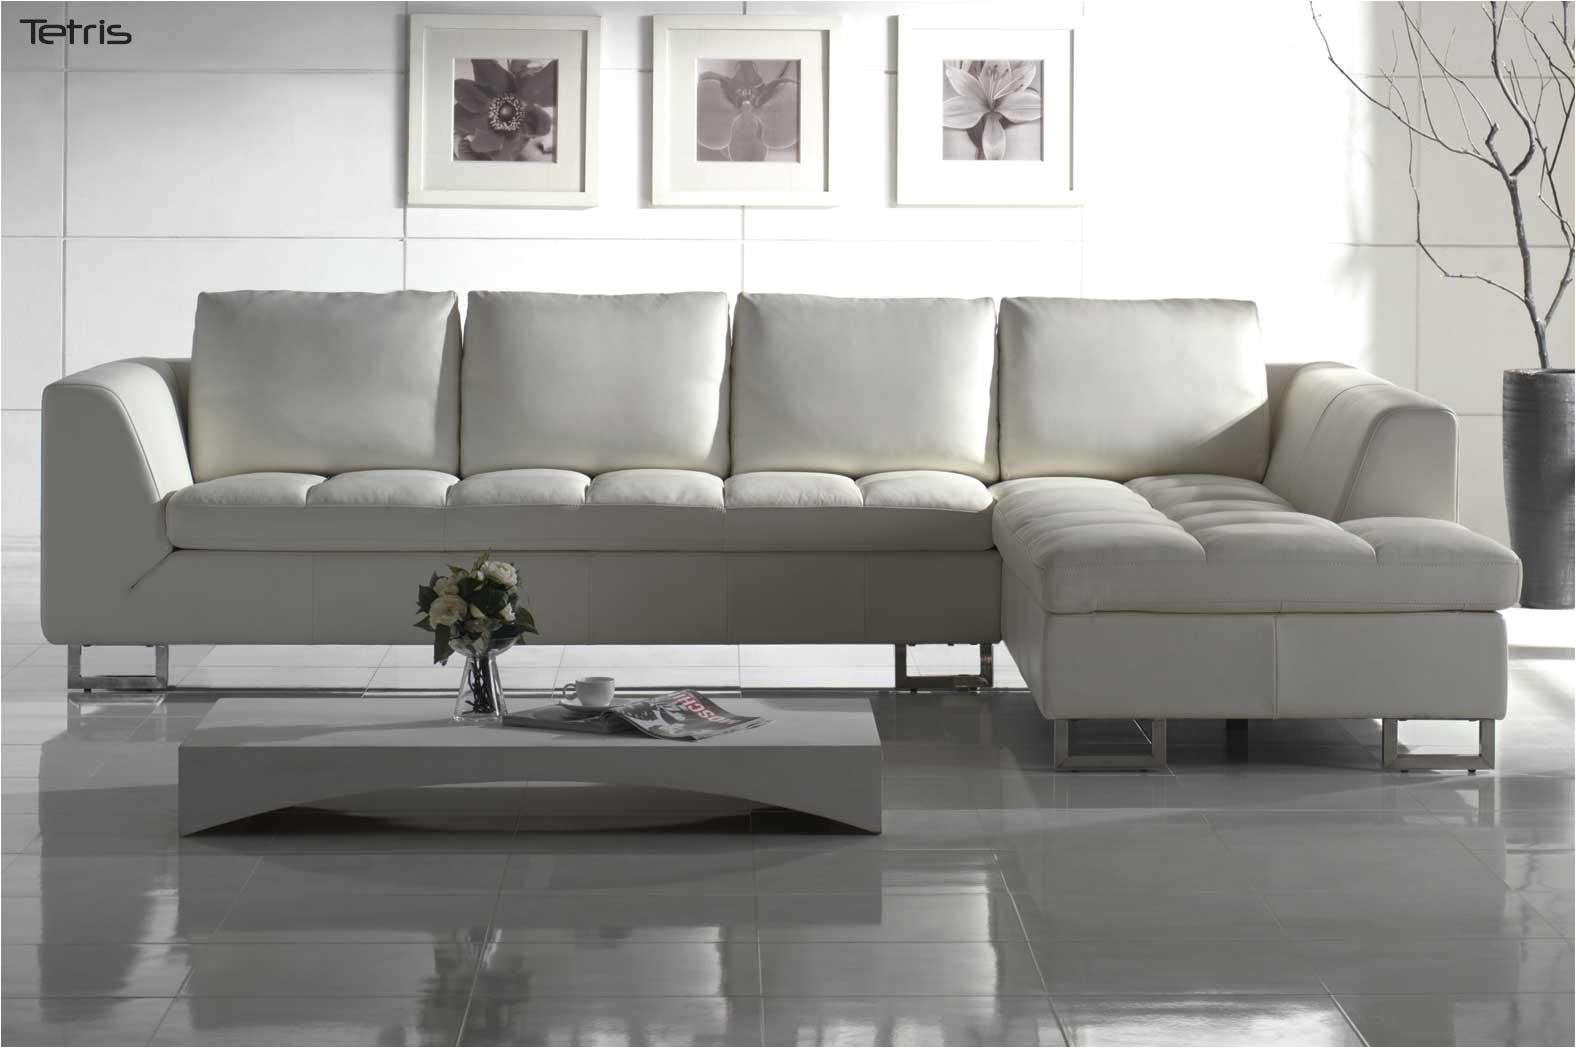 full size of bestl sofa remarkable images ideas the white leather s3net sofas sale with chaise